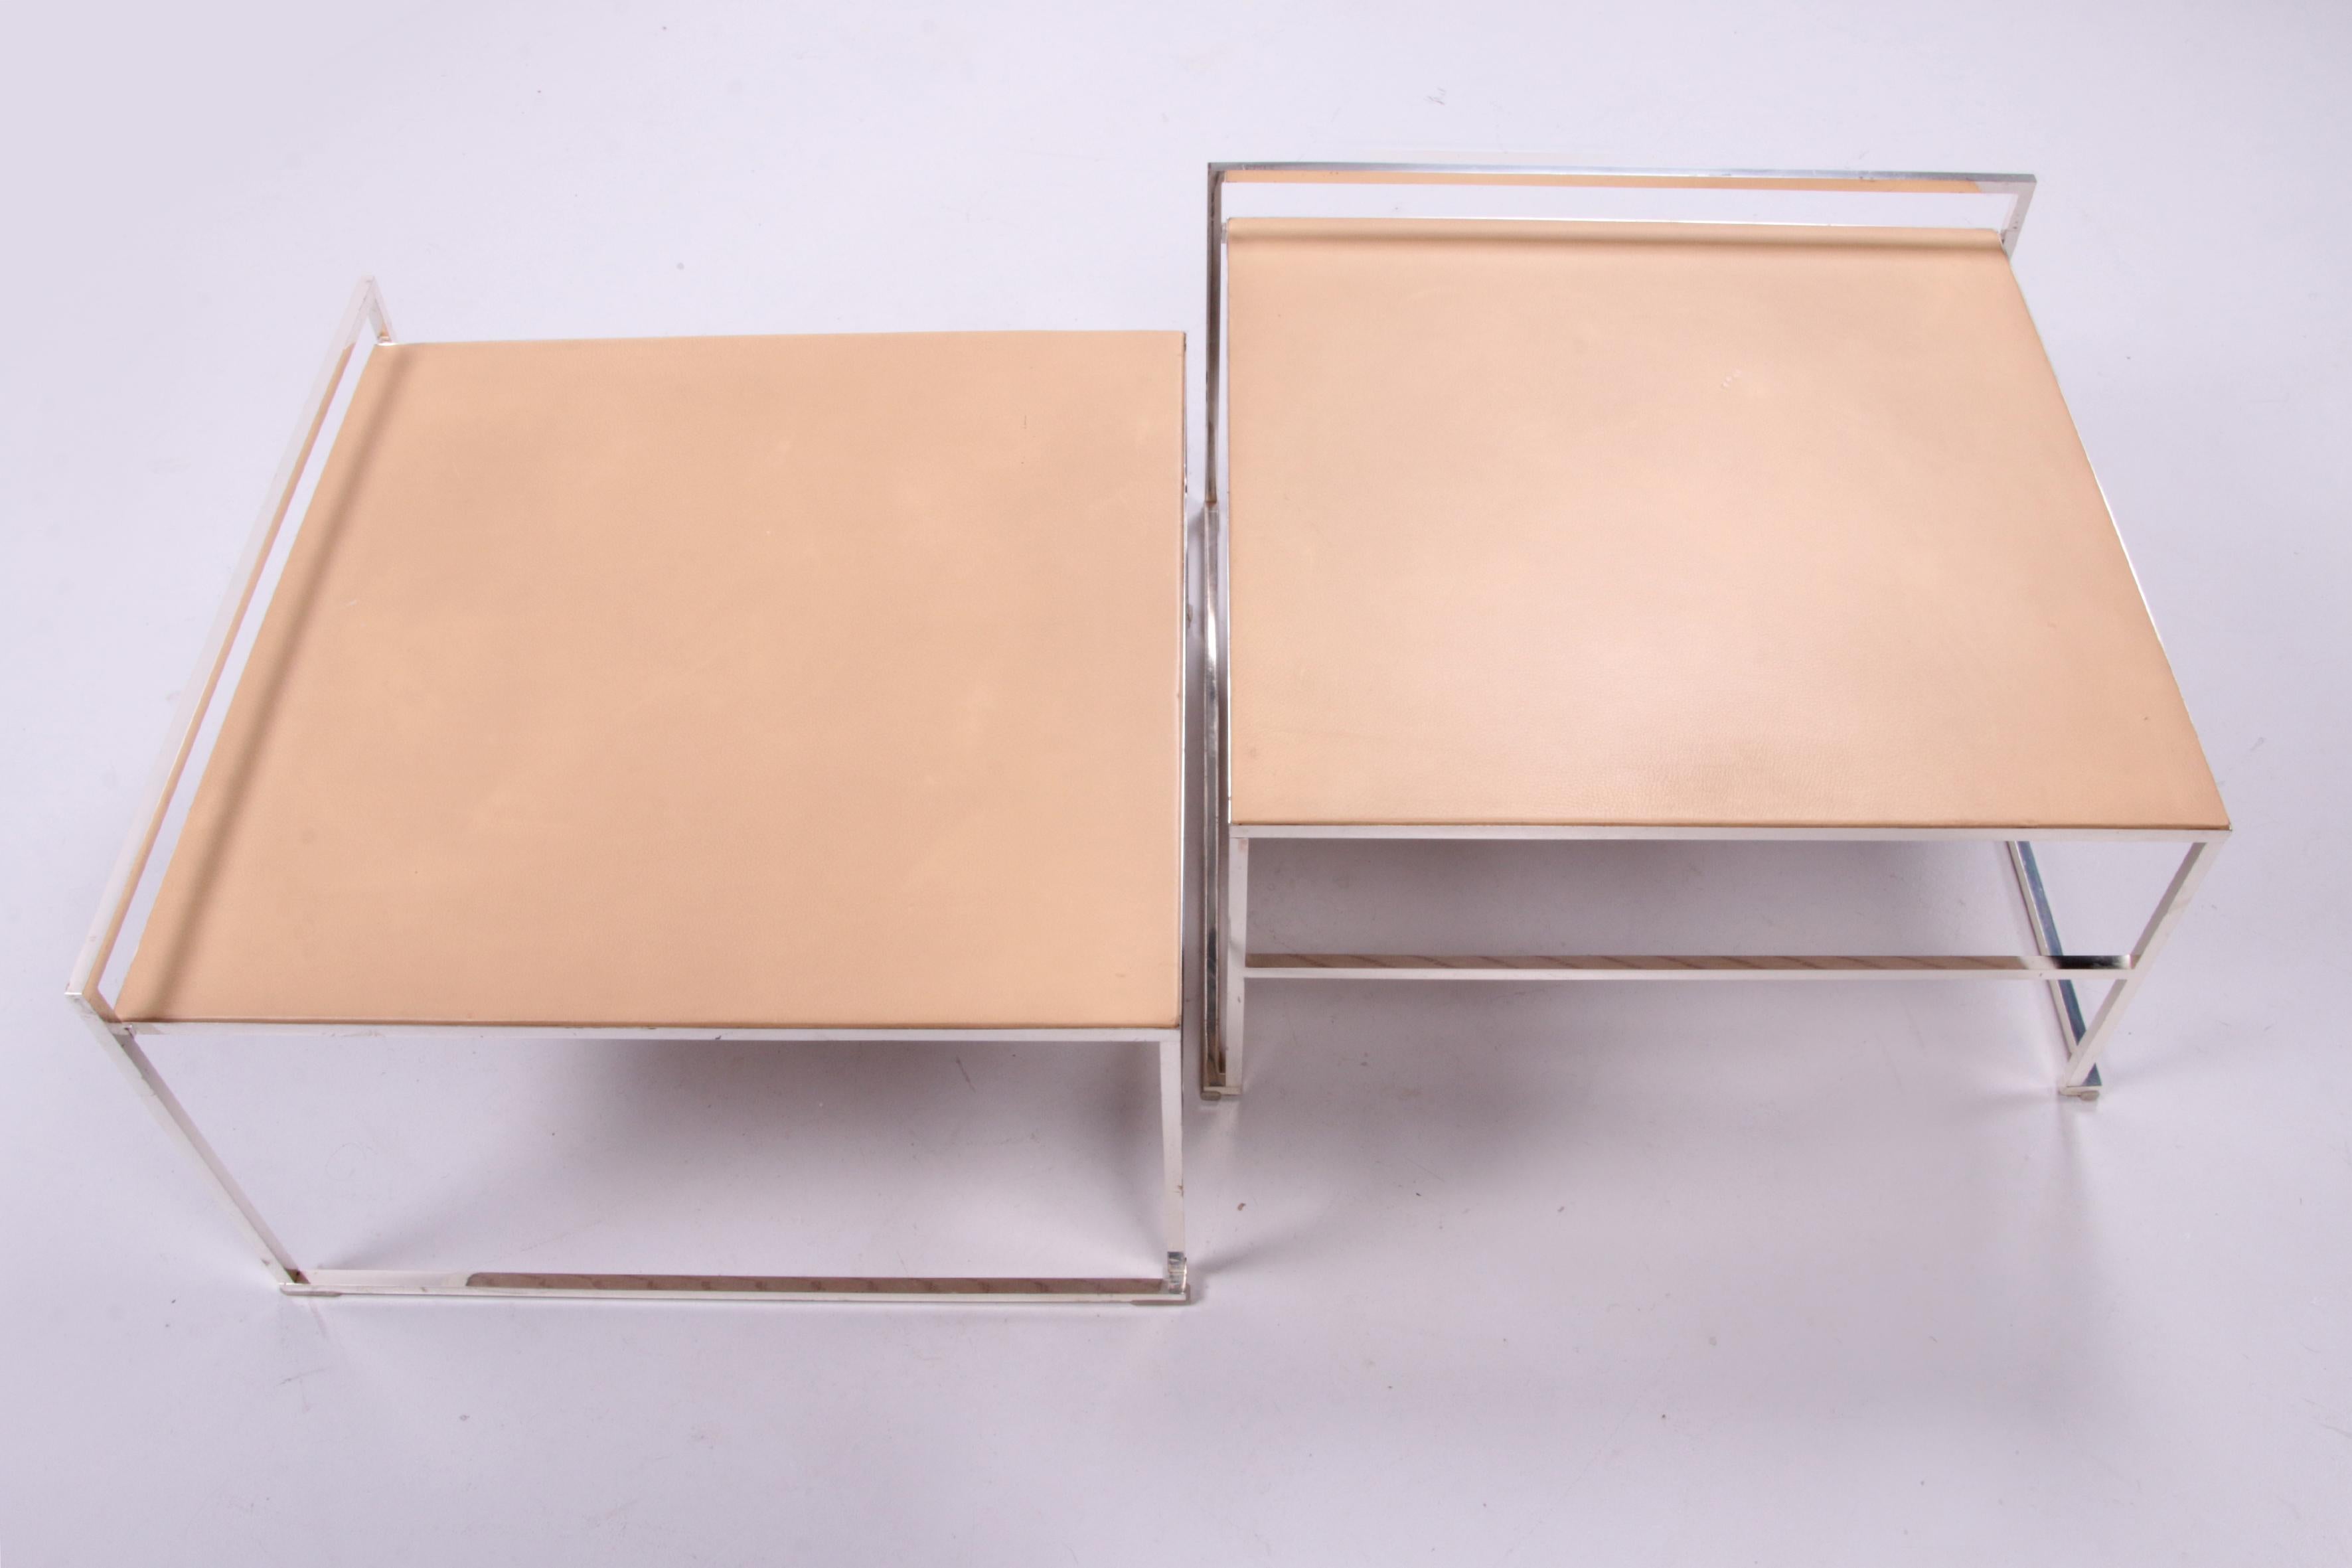 Poltrona Frau Set of 2 Side Tables with Leather Top 1970, Italy For Sale 5